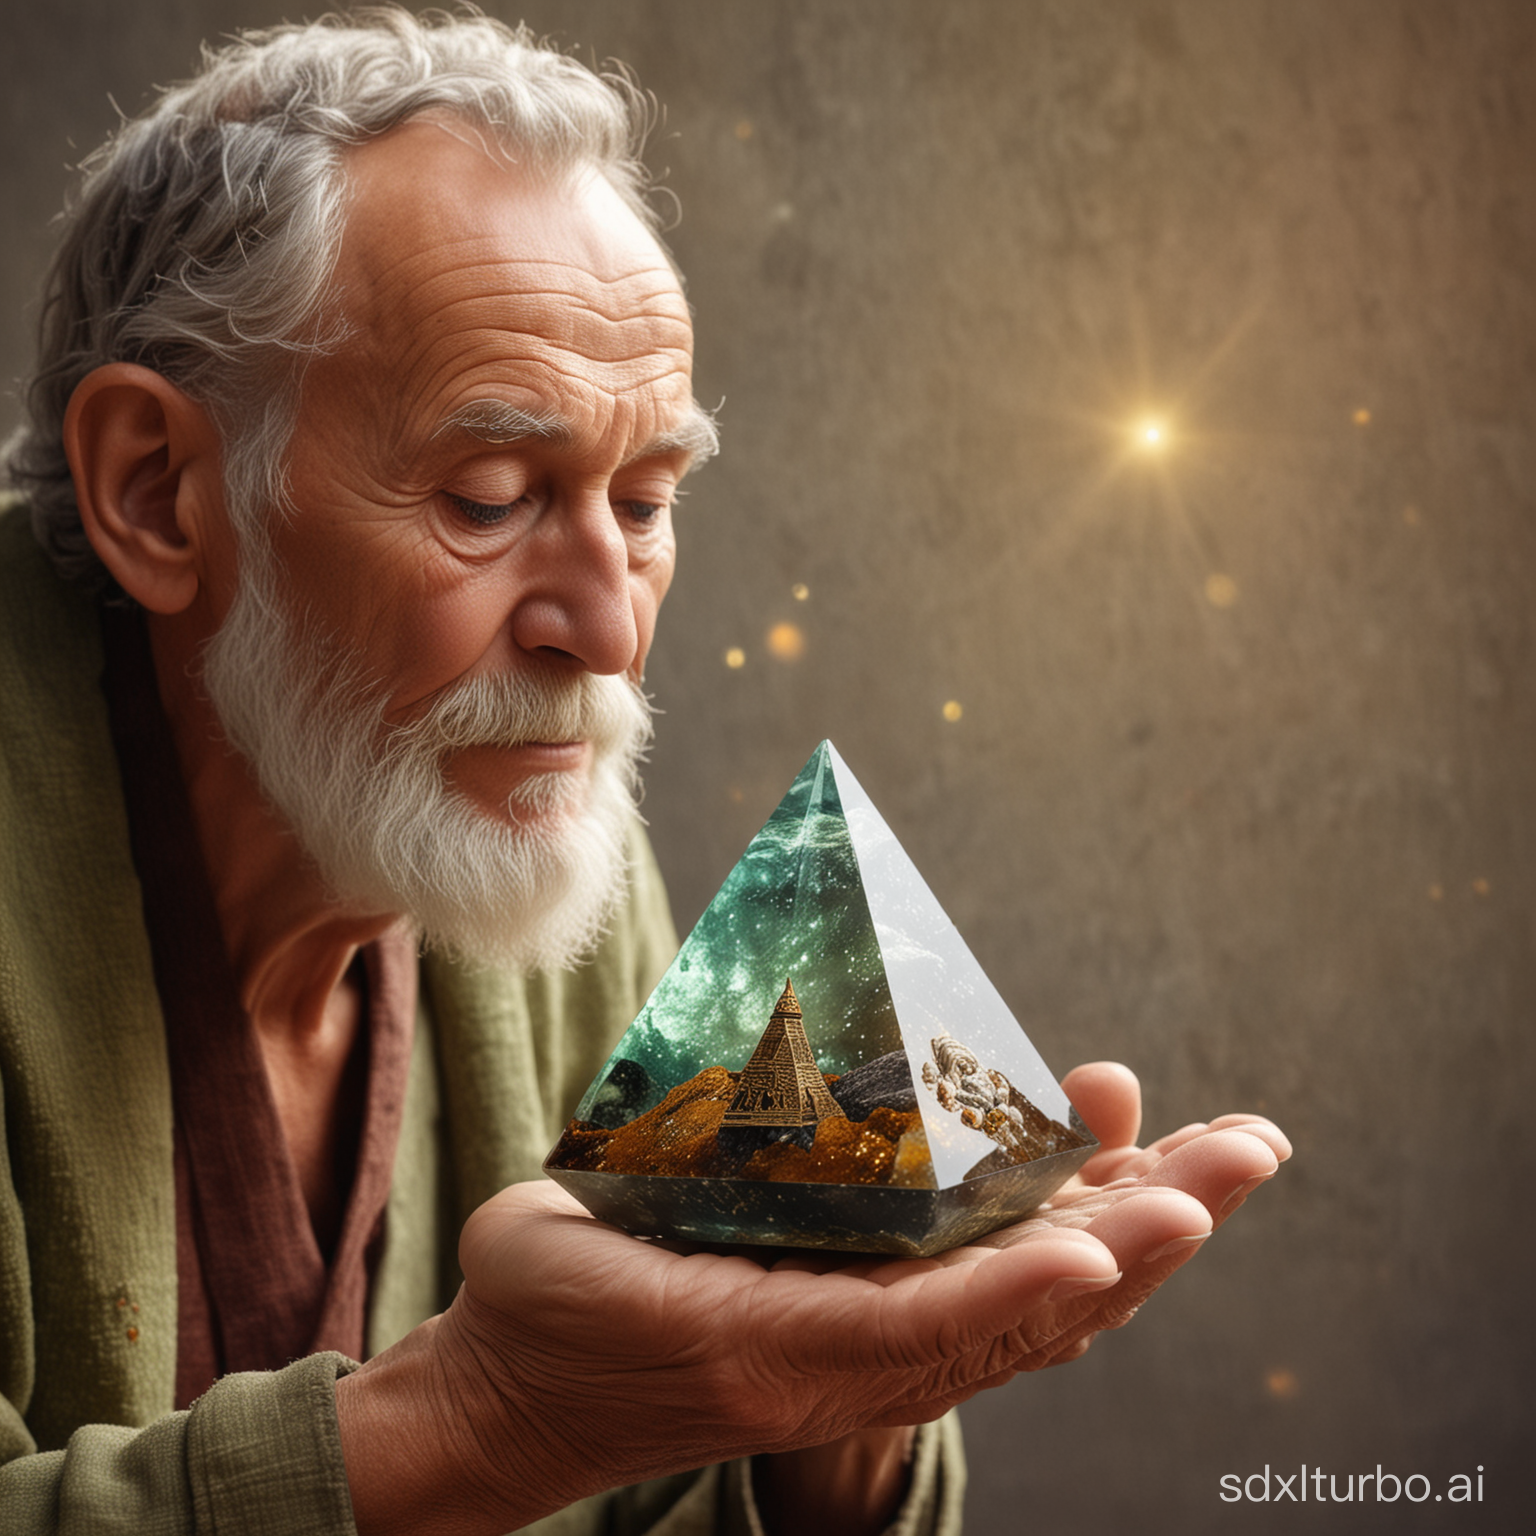 side view of a 70 year old wise sage holding and watching a small  orgonite pyramid on his hand, real human, magical atomesphere ,  by canon, very realistic,  photo view